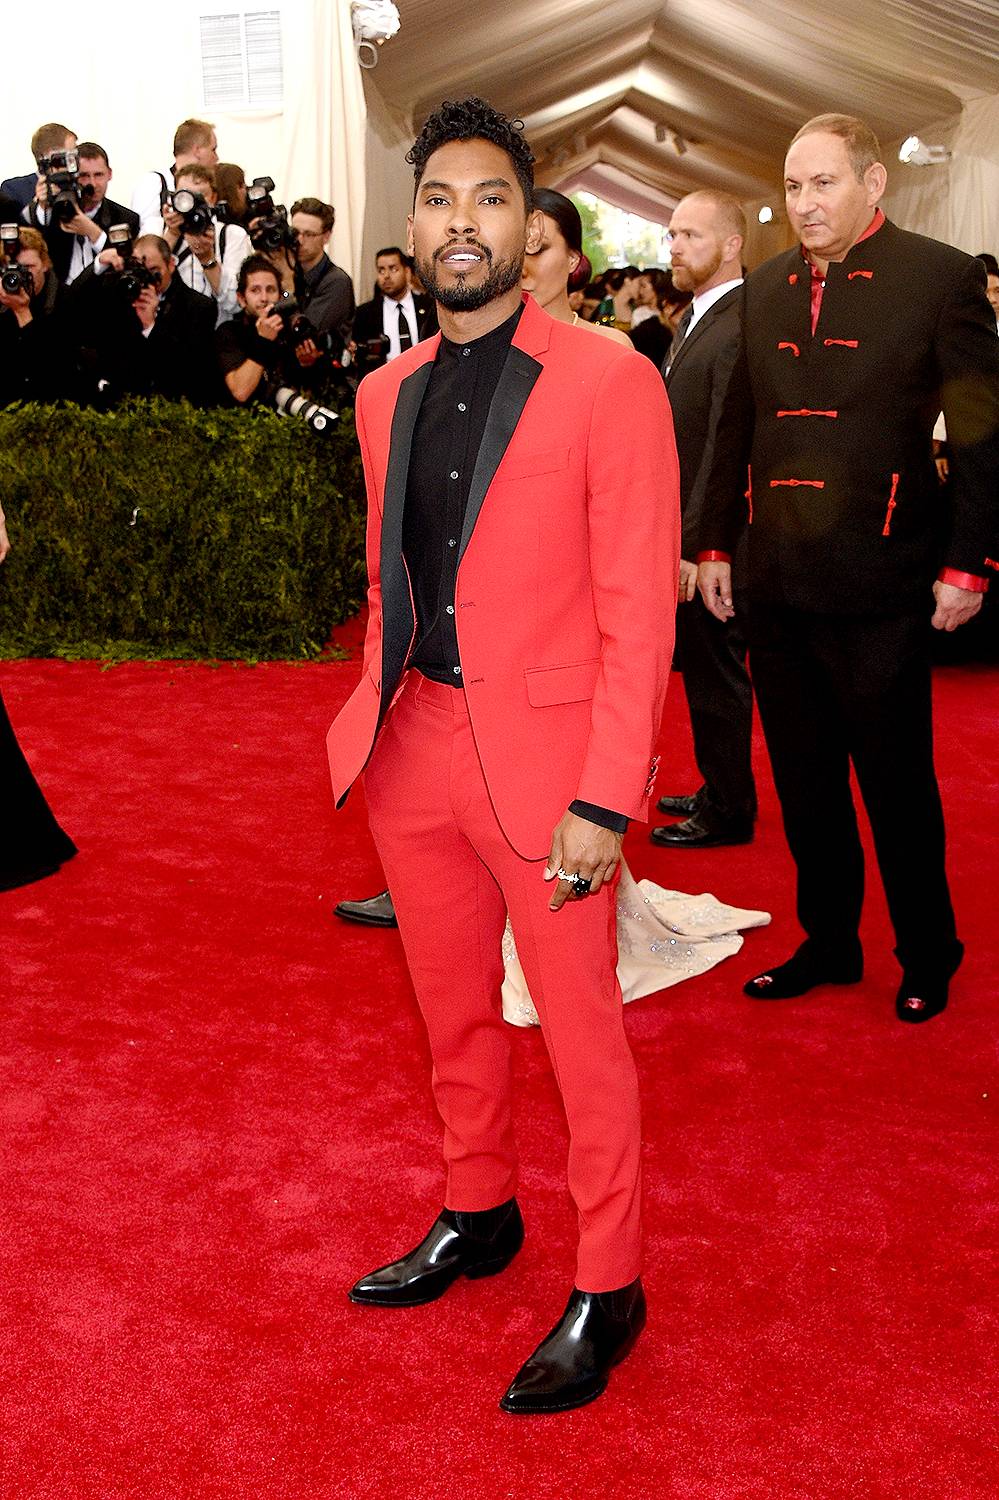 Met Gala 2015  Prom outfits for guys, Guys prom outfit, Dapper dudes